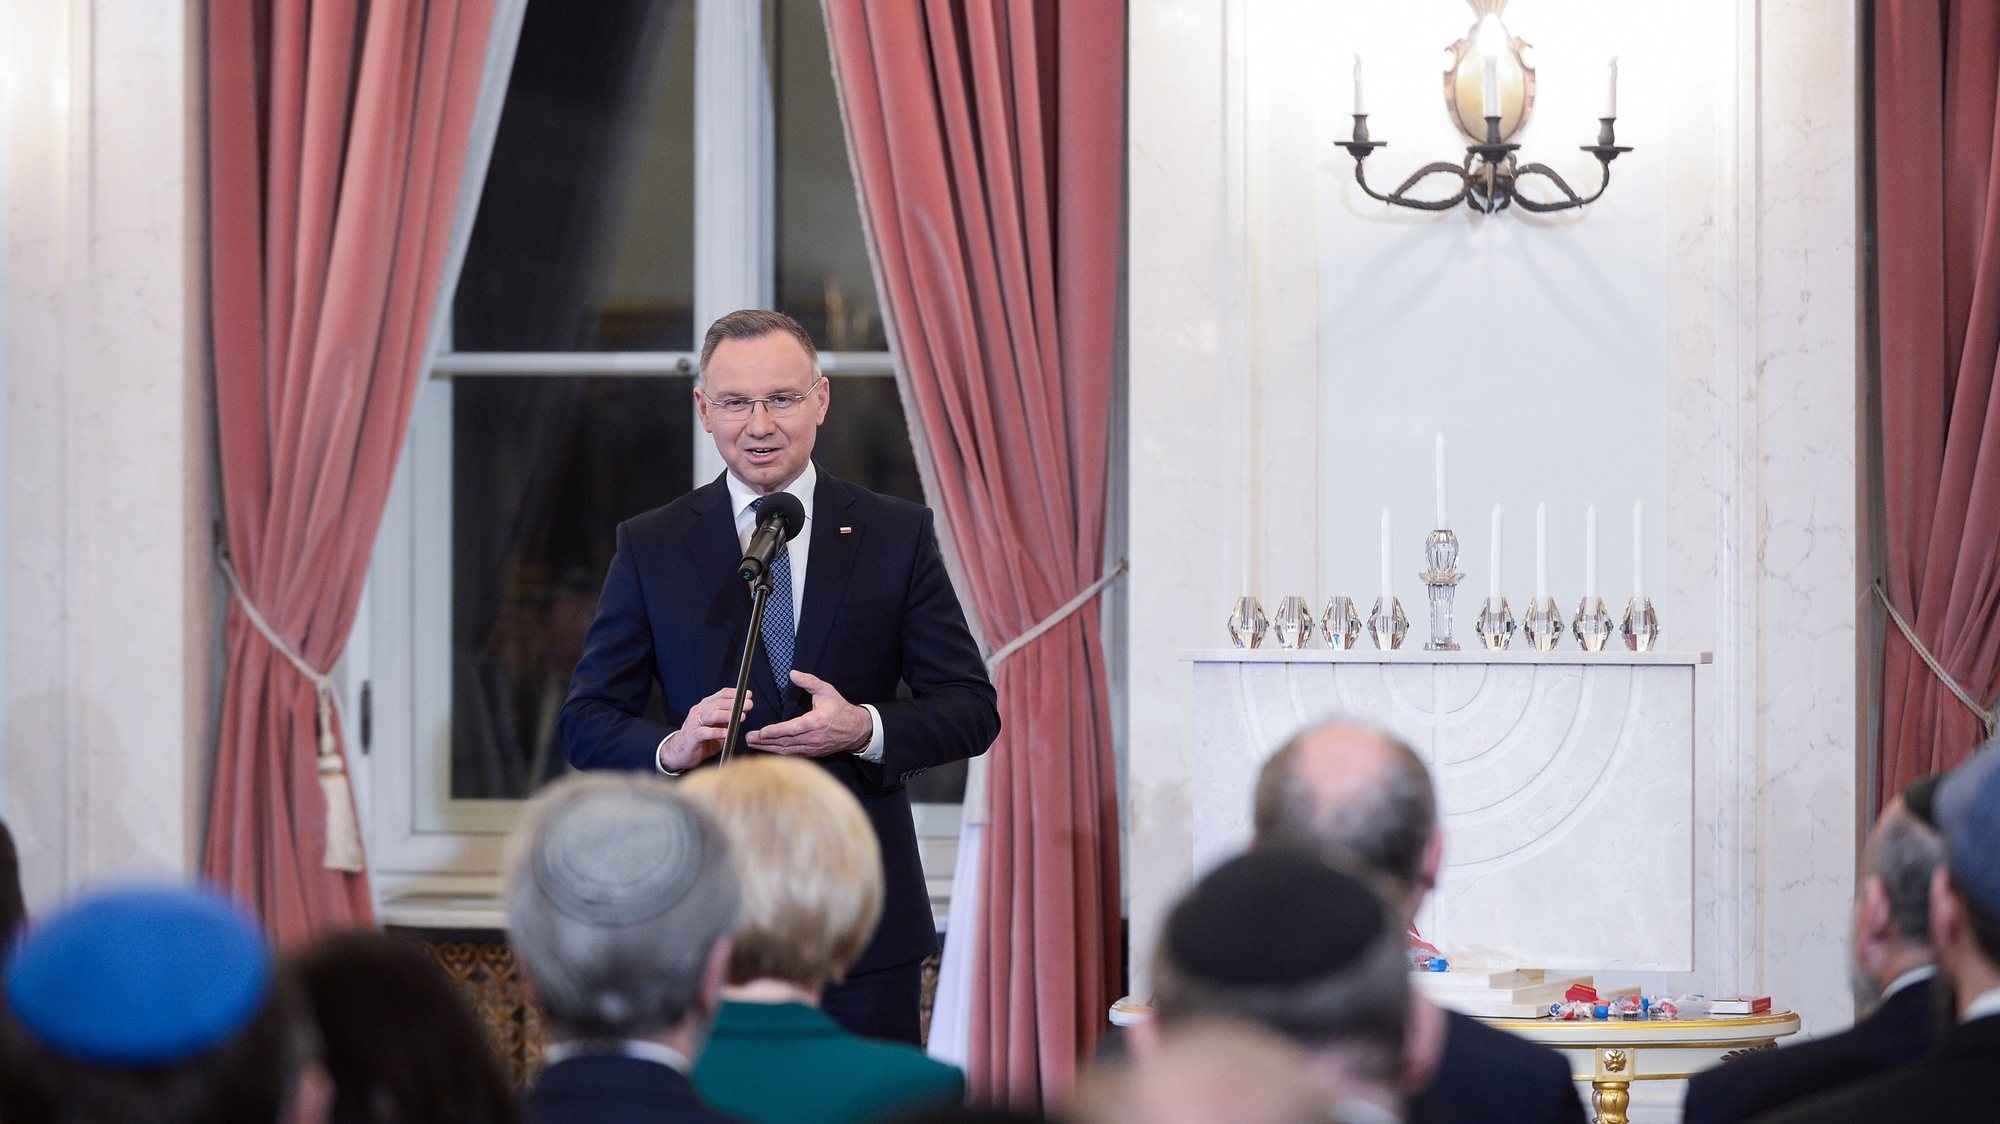 epa11023170 Polish President Andrzej Duda speaks during the ceremony of lighting the candles on the traditional Jewish feast of Hanukkah at the Presidential Palace in Warsaw, Poland, 11 December 2023. The Hanukkah menorah was lit to mark the start of the Jewish Hanukkah holiday and symbolize the victory of light over darkness.  EPA/Marcin Obara POLAND OUT